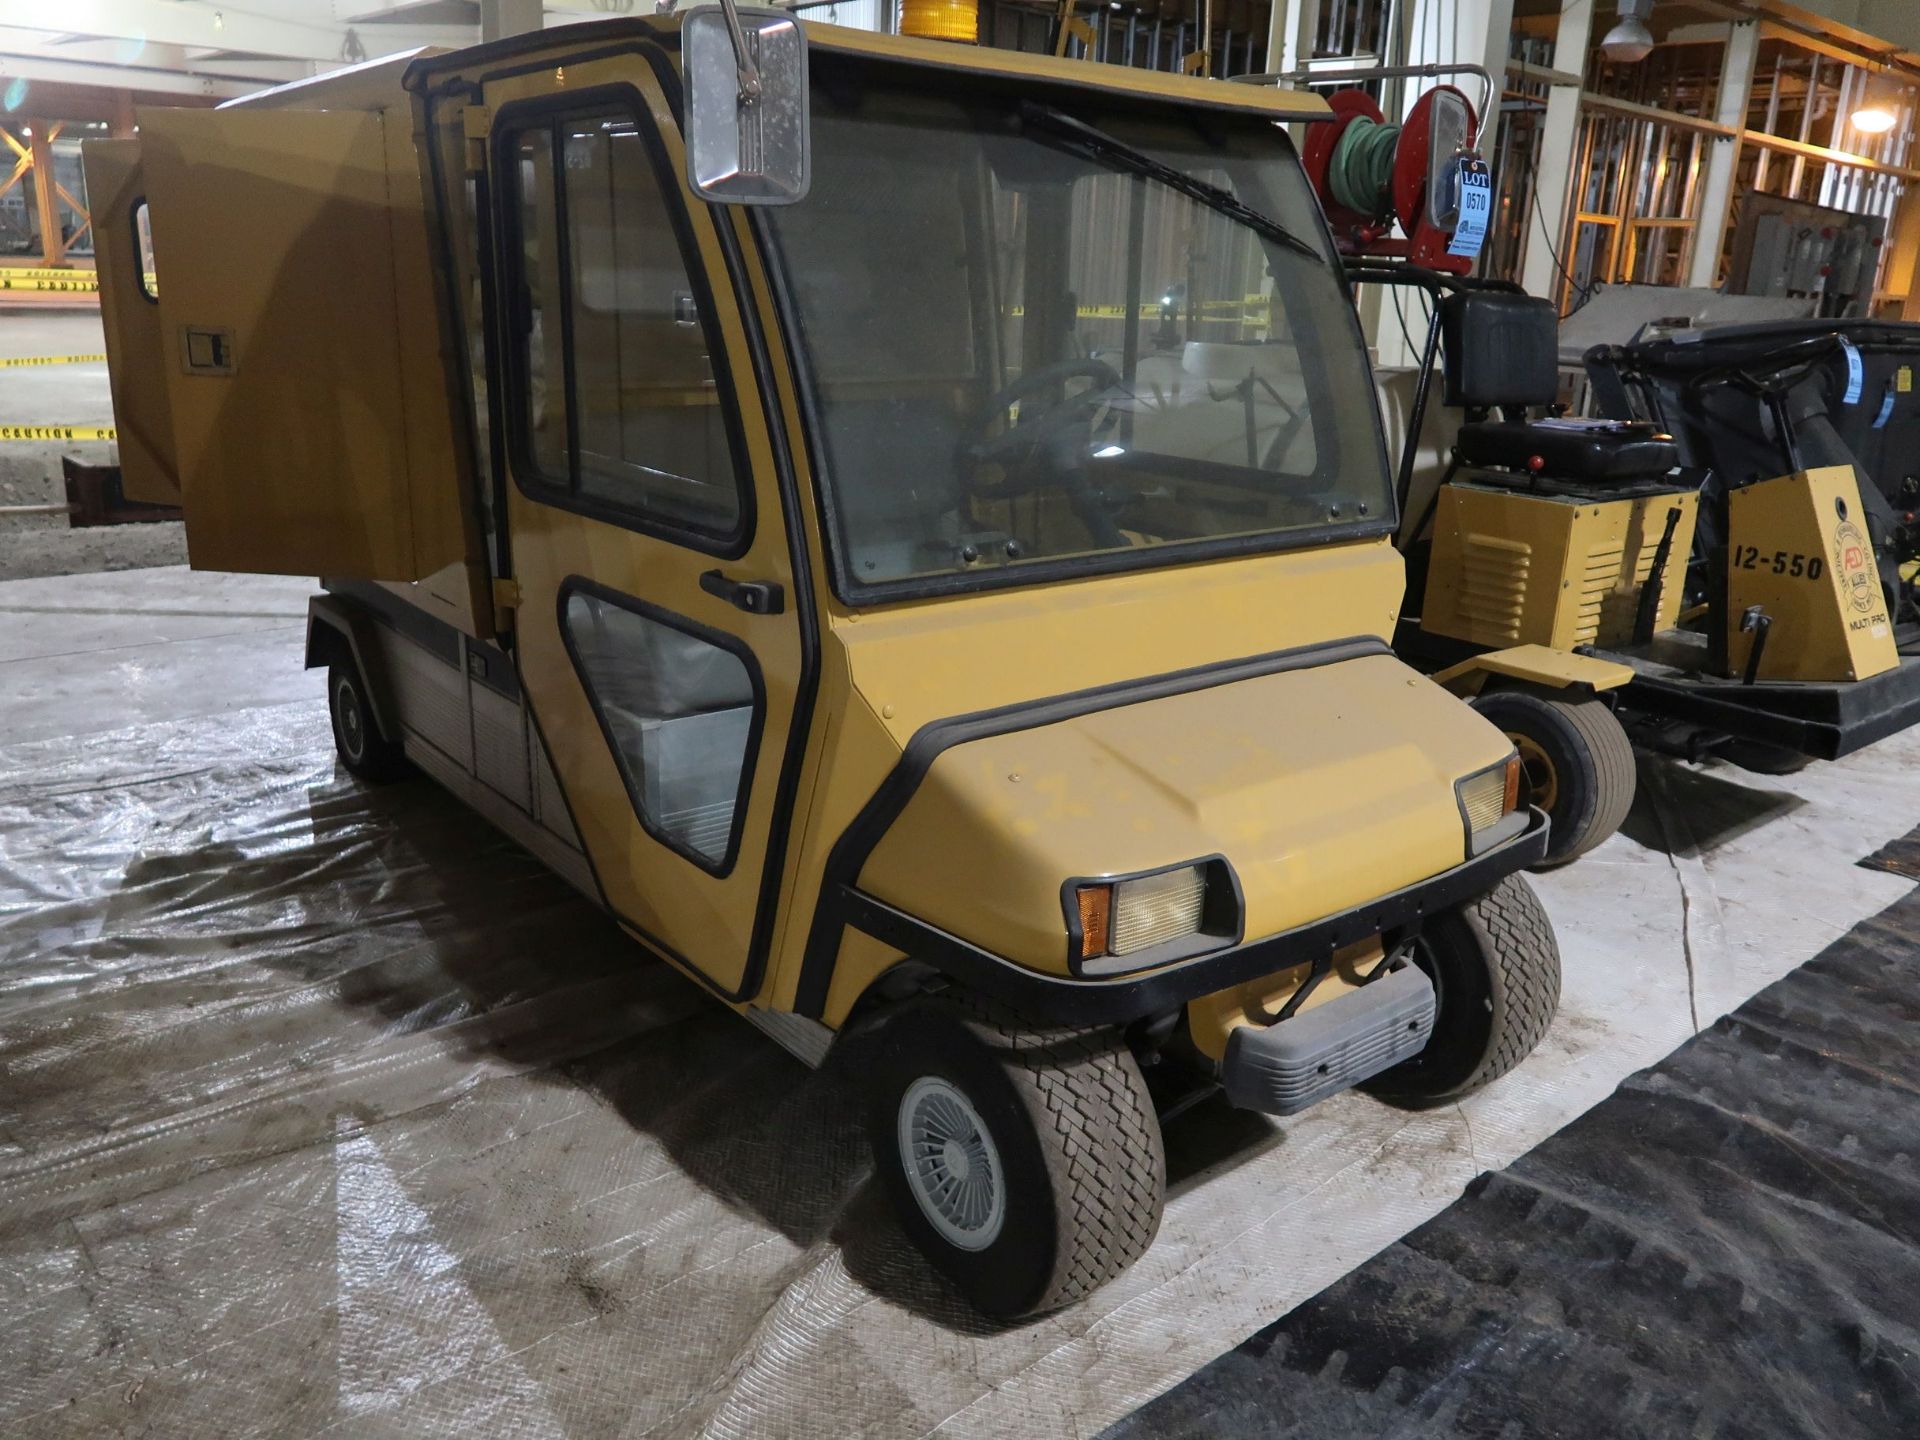 INGERSOLL RAND / CLUBCAR CARRYALL 6 ELECTRIC ENCLOSED REAR MAINTENANCE CART; S/N J0531-528157, 48" X - Image 3 of 6